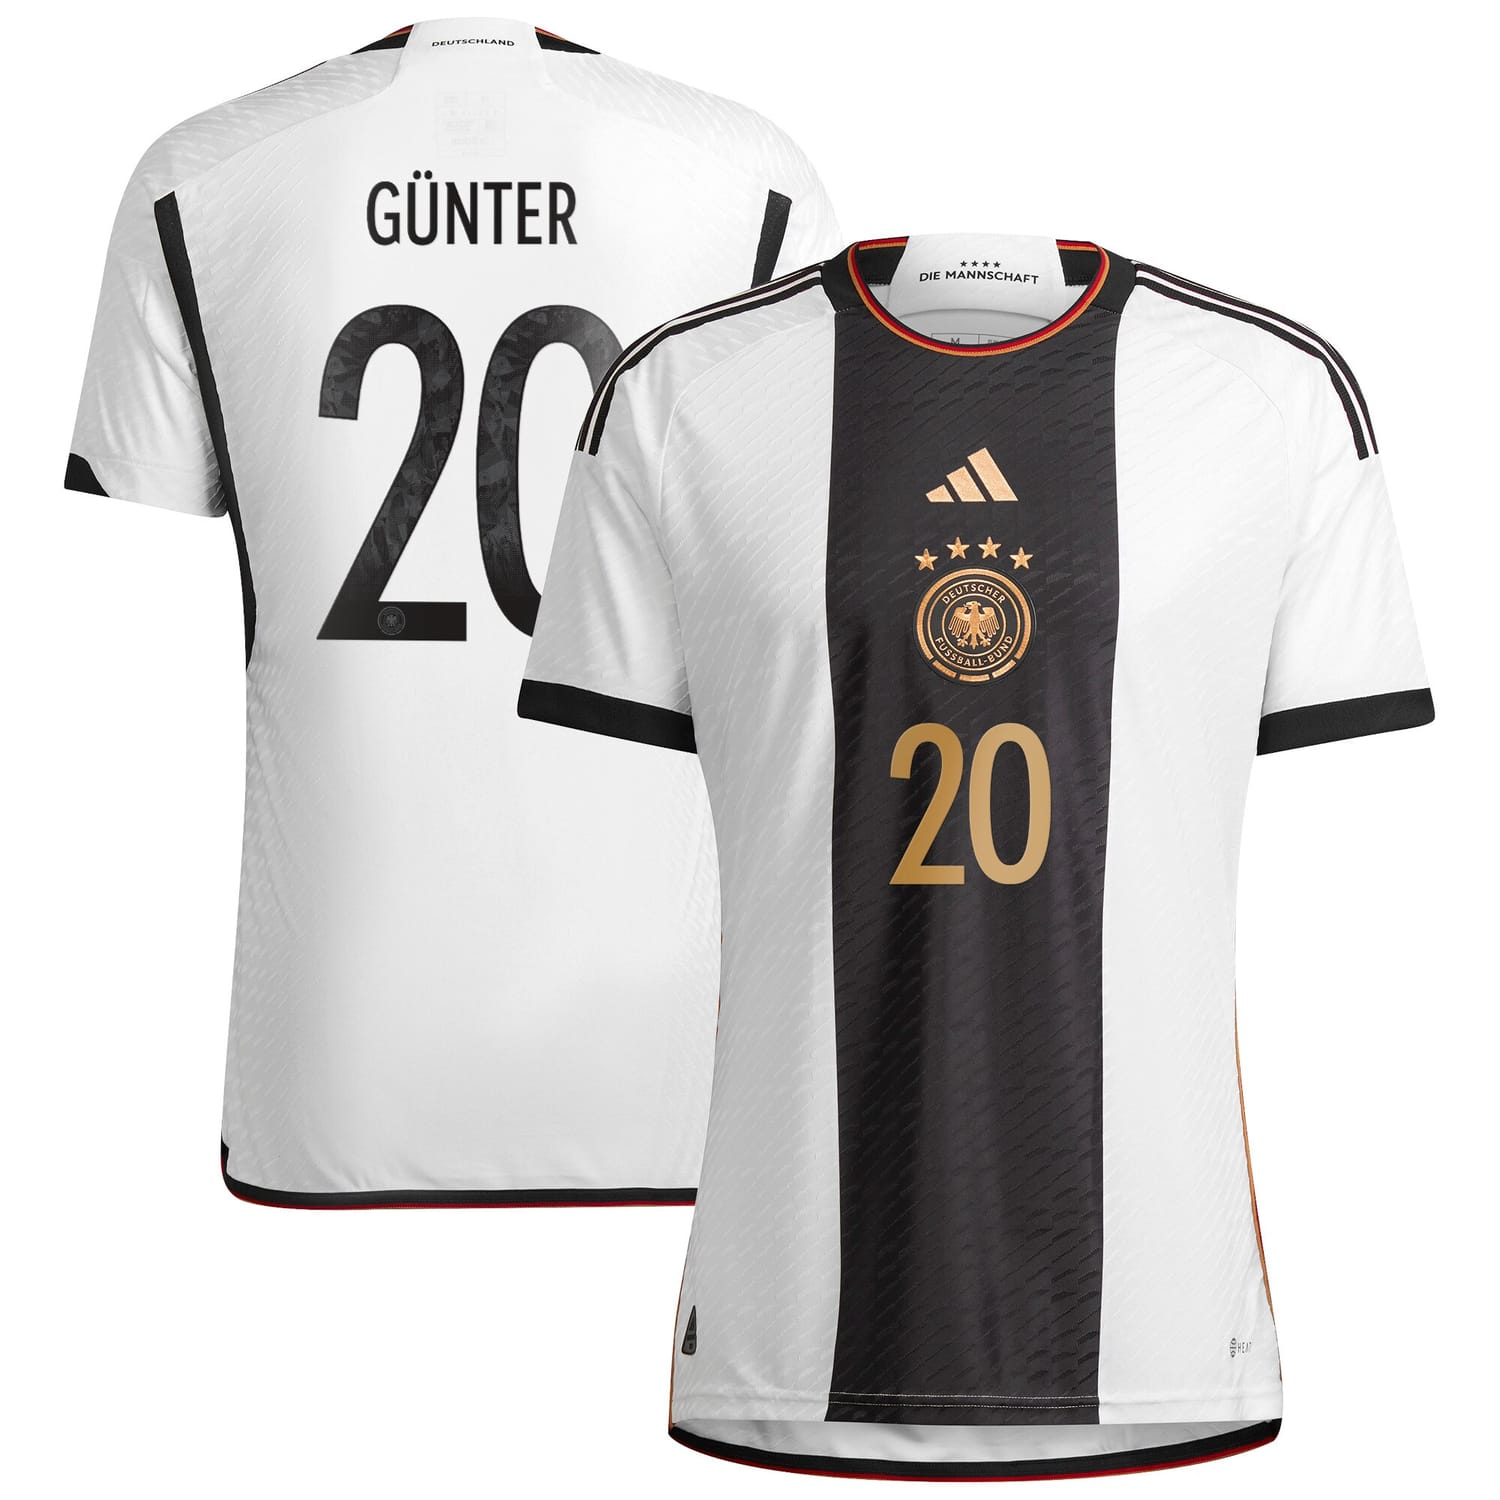 Germany National Team Home Authentic Jersey Shirt 2022 player Christian Günter 20 printing for Men